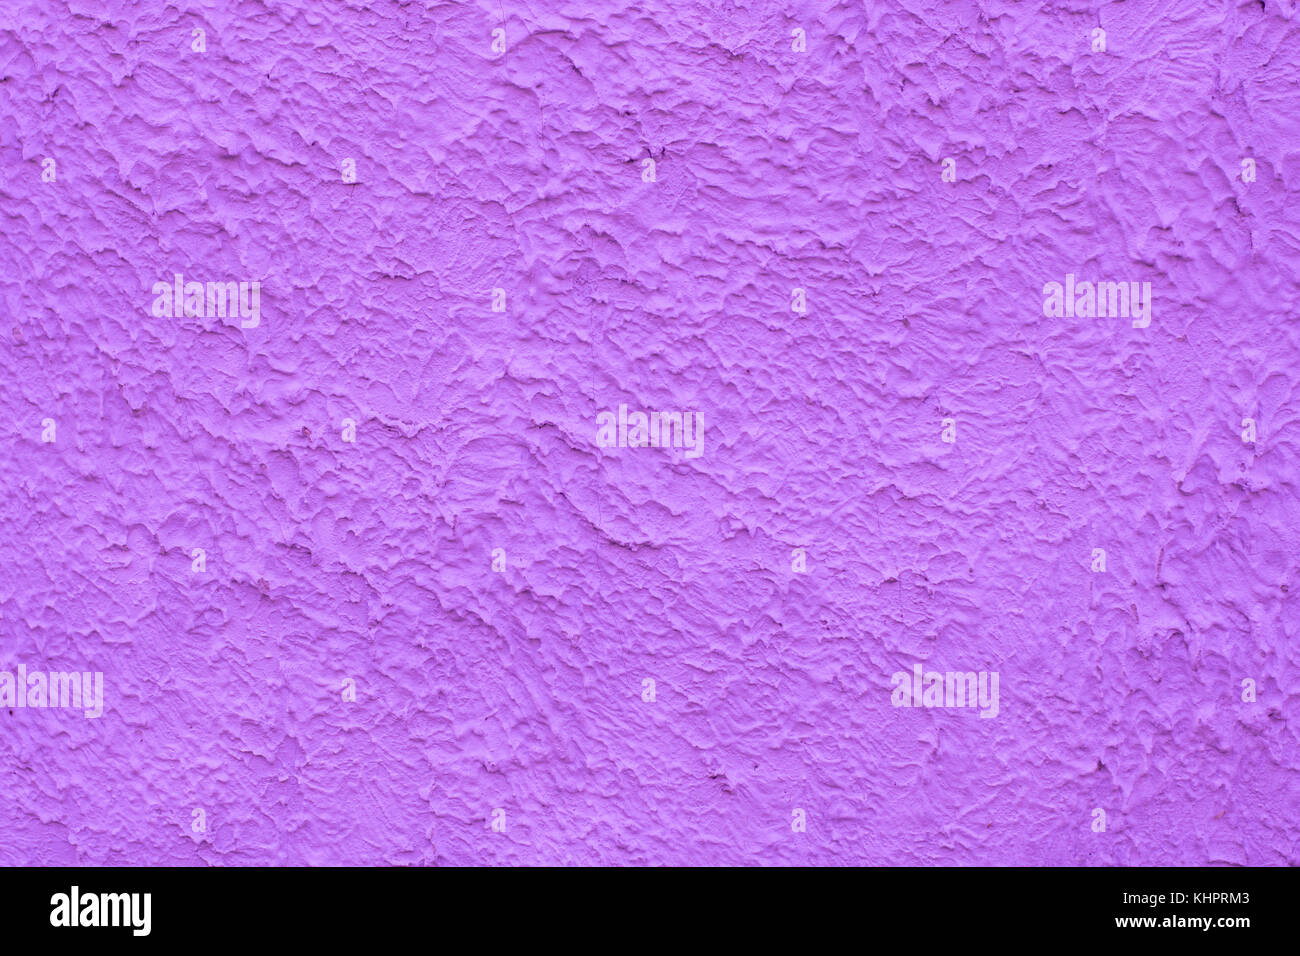 Background of a rough wall of a purple hue, background, design, retro, pattern, vintage, ornament, texture, banner, light, decorative, fashionable, wa Stock Photo